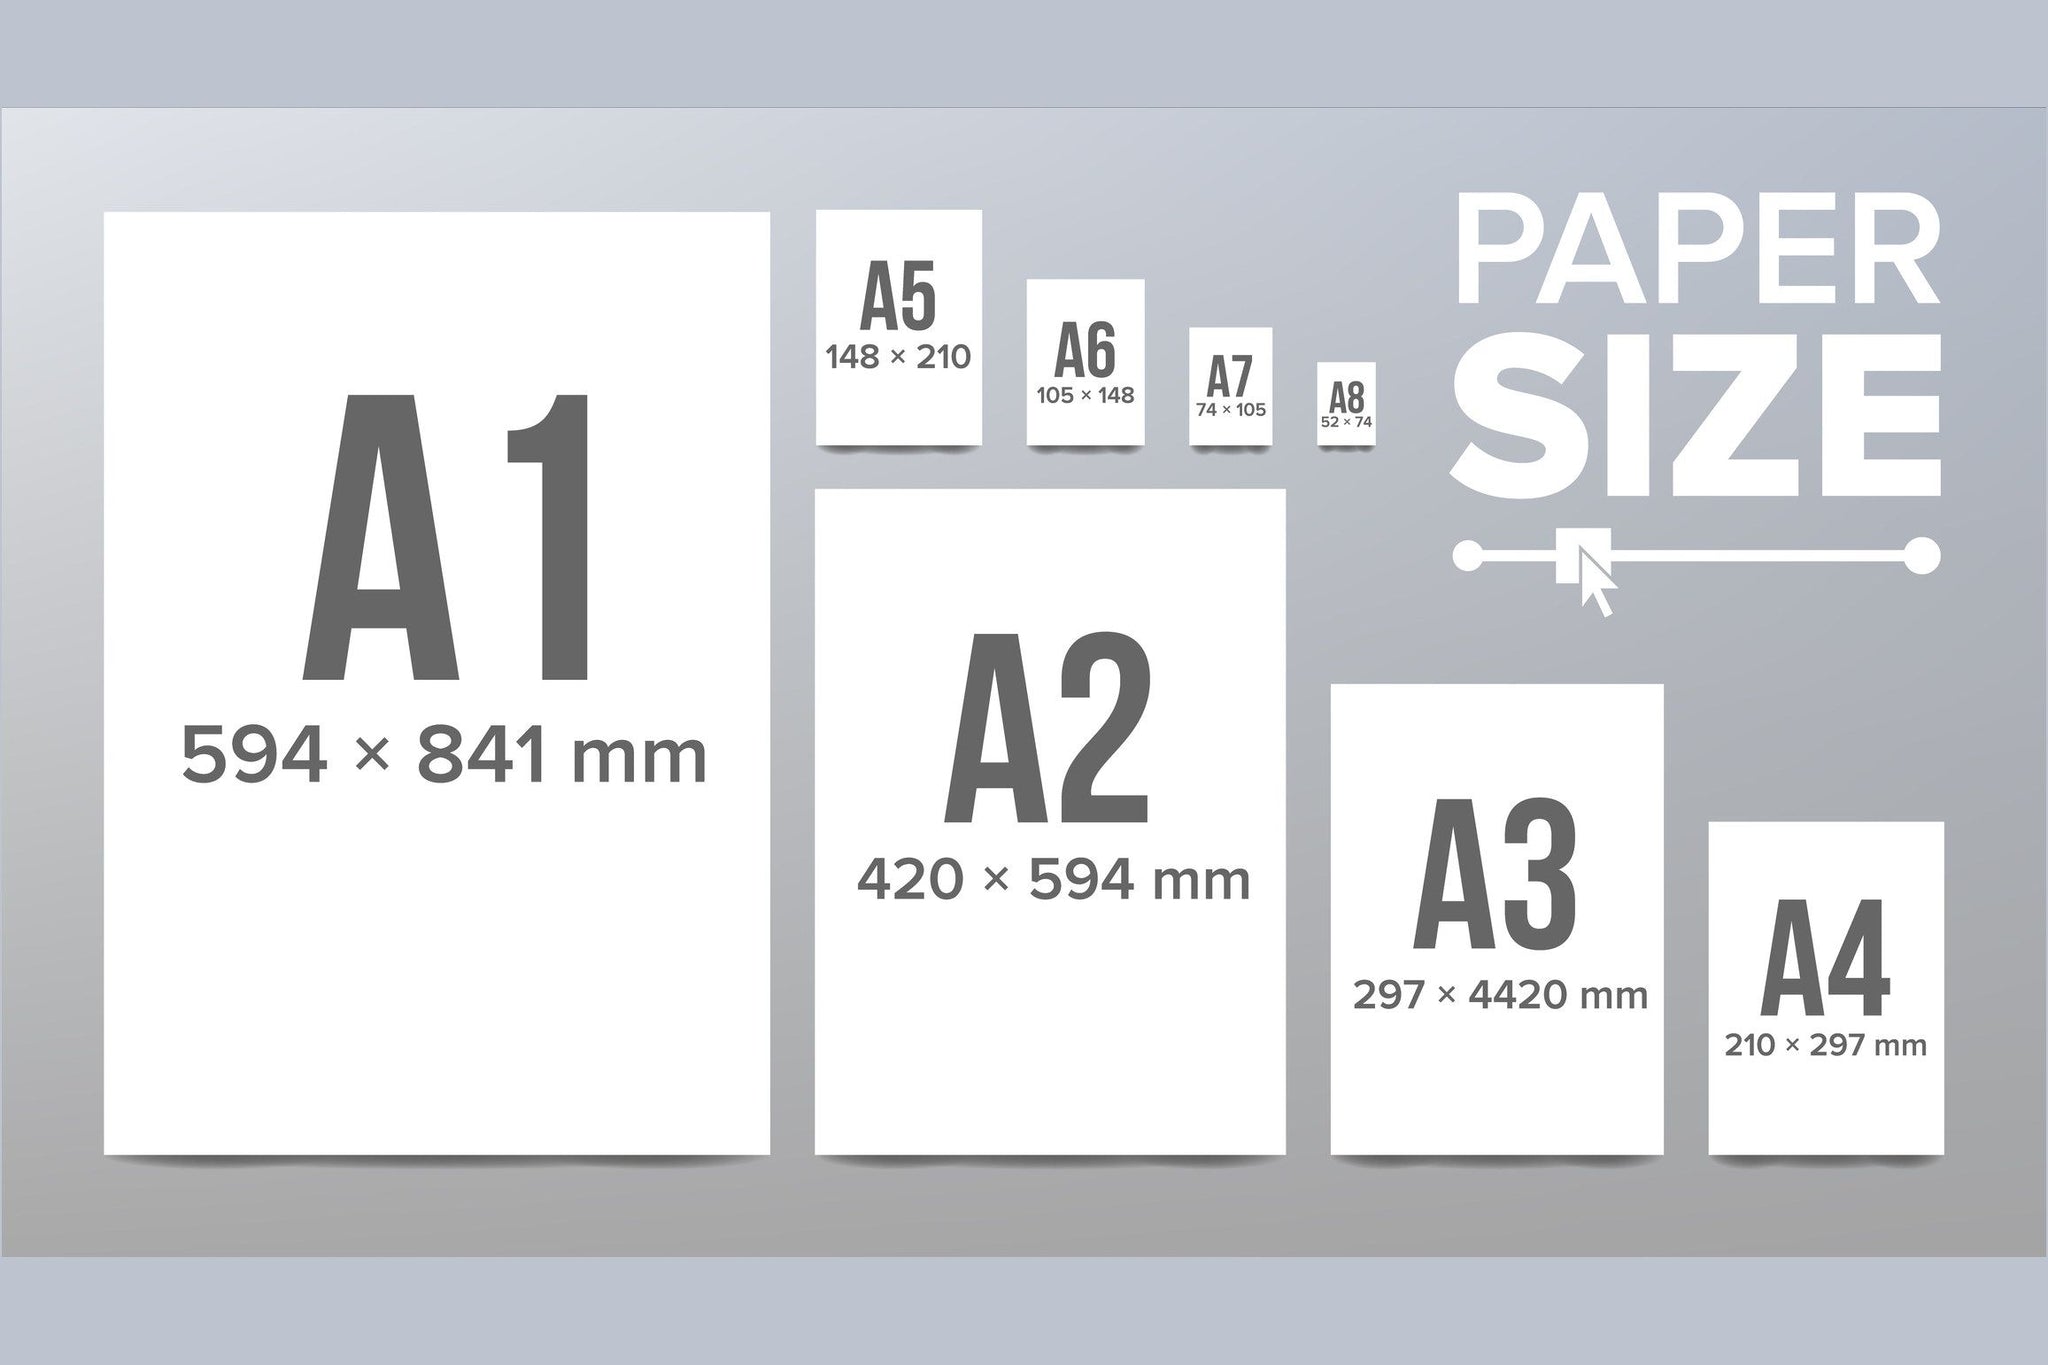 The Complete Guide to Paper Sizes